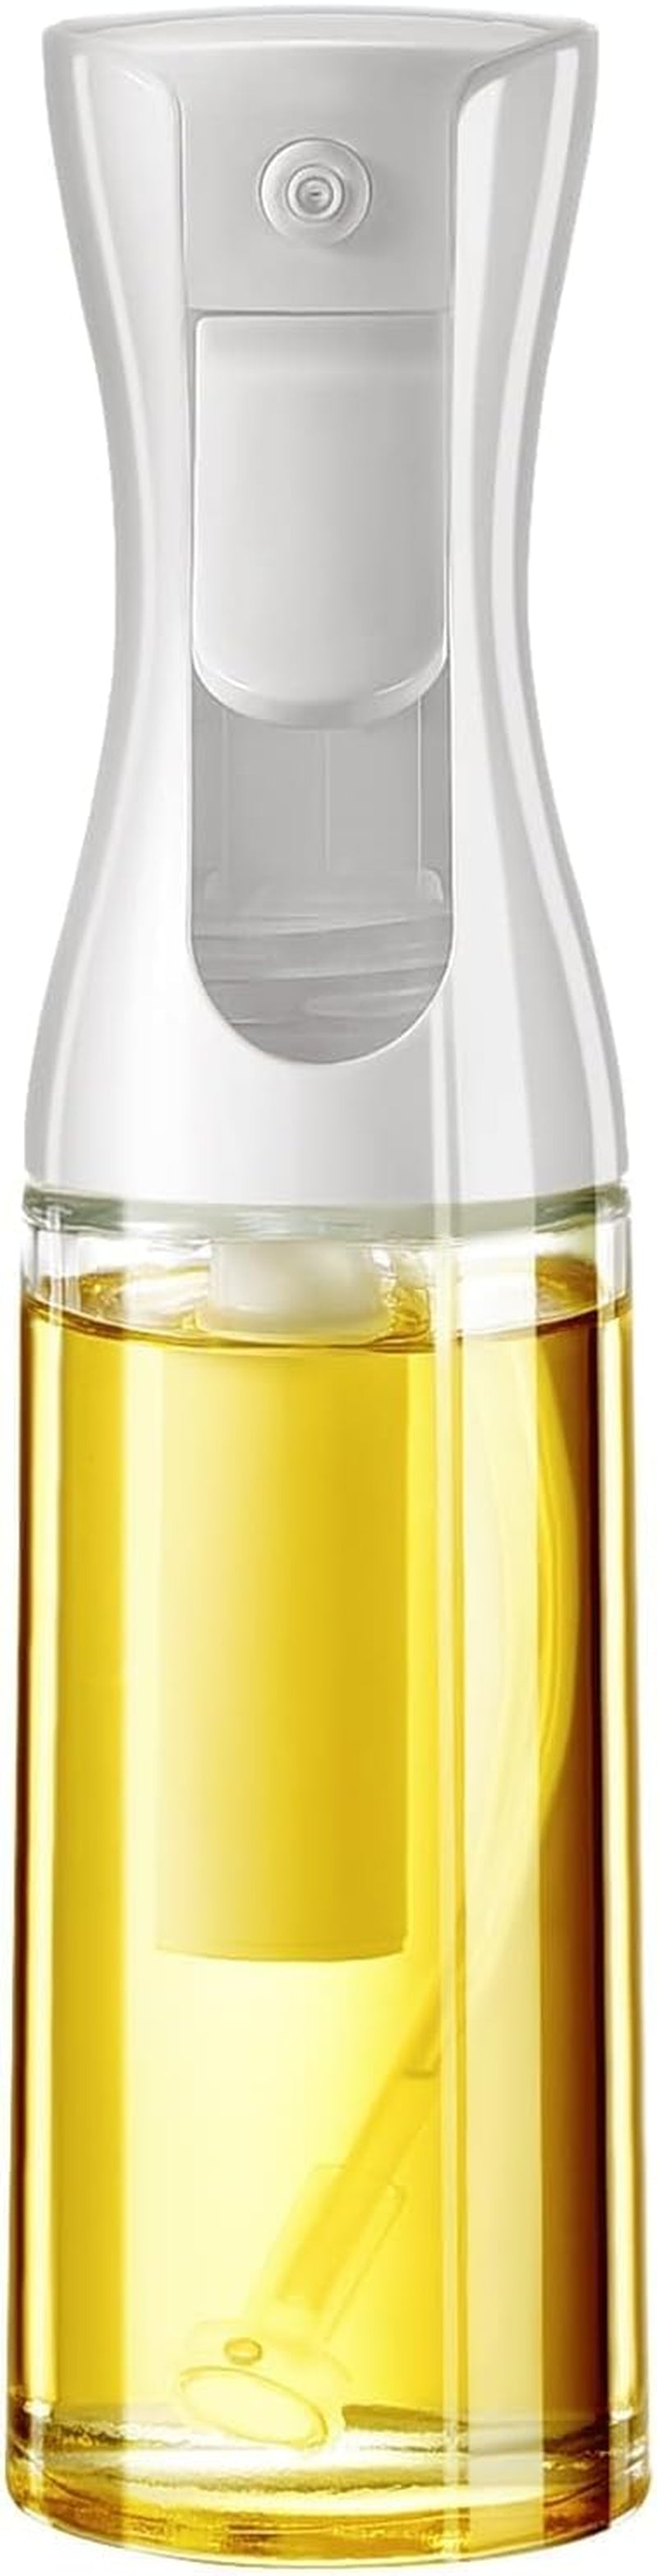 Oil Sprayer for Cooking- 200Ml Glass Olive Oil Sprayer Mister, Olive Oil Spray Bottle, Kitchen Gadgets Accessories for Air Fryer, Canola Oil Spritzer, Widely Used for Salad Making, Baking, Frying,Bbq4